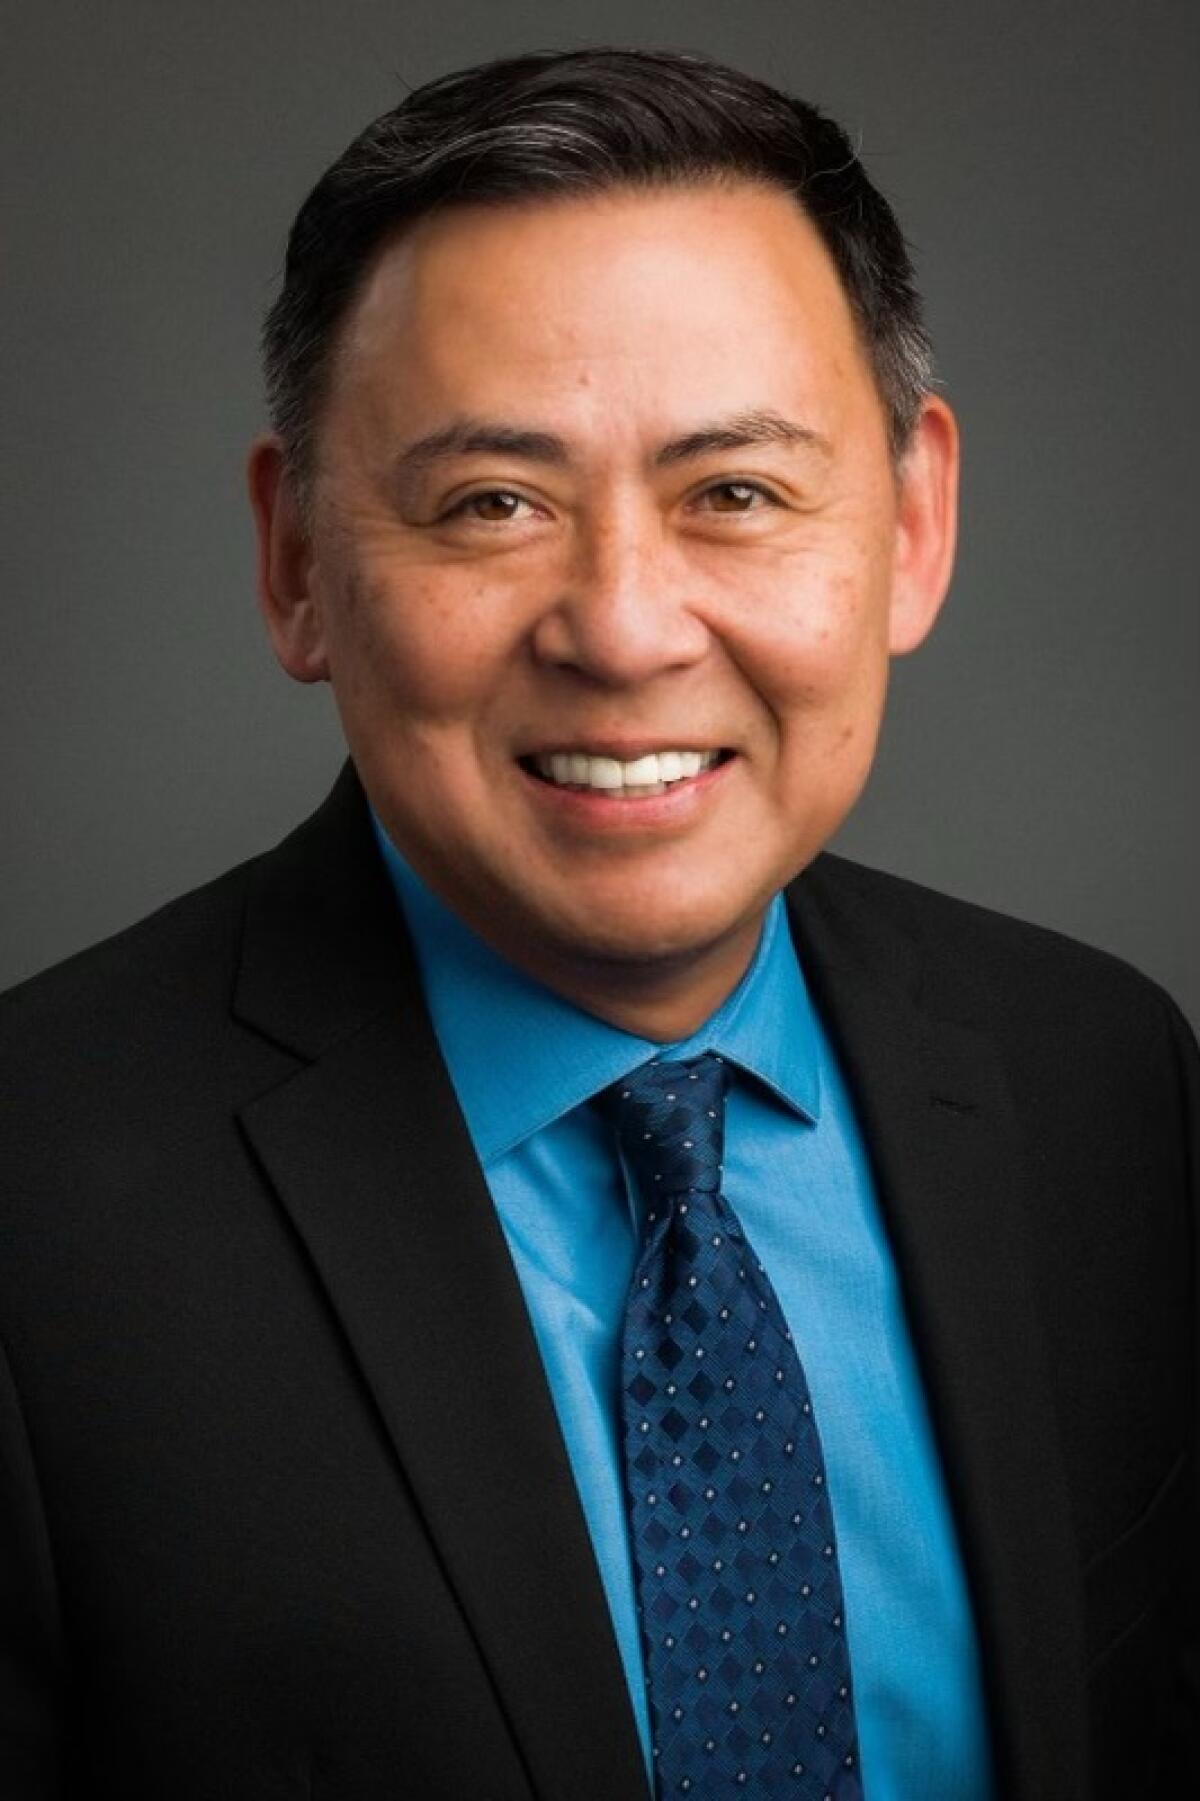 Newport-Mesa Unified School District Supt. Russell Lee-Sung